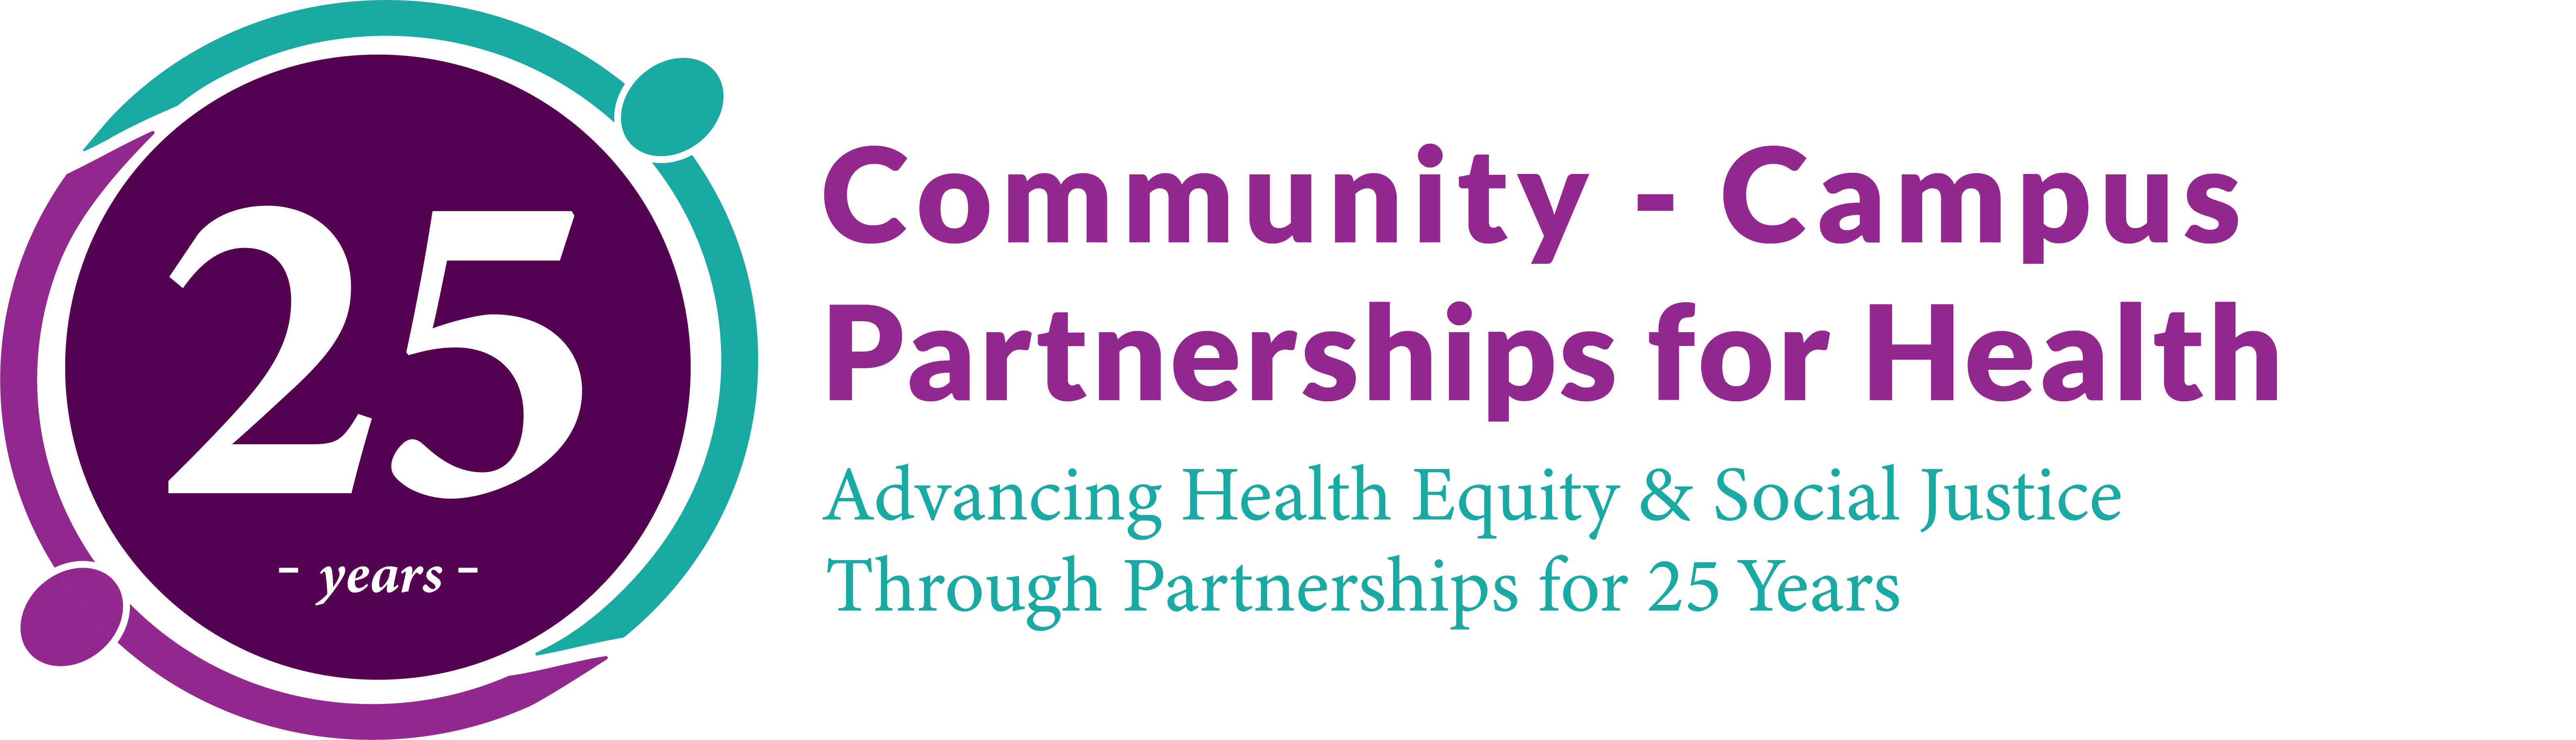 Community-Campus Partnerships for Health